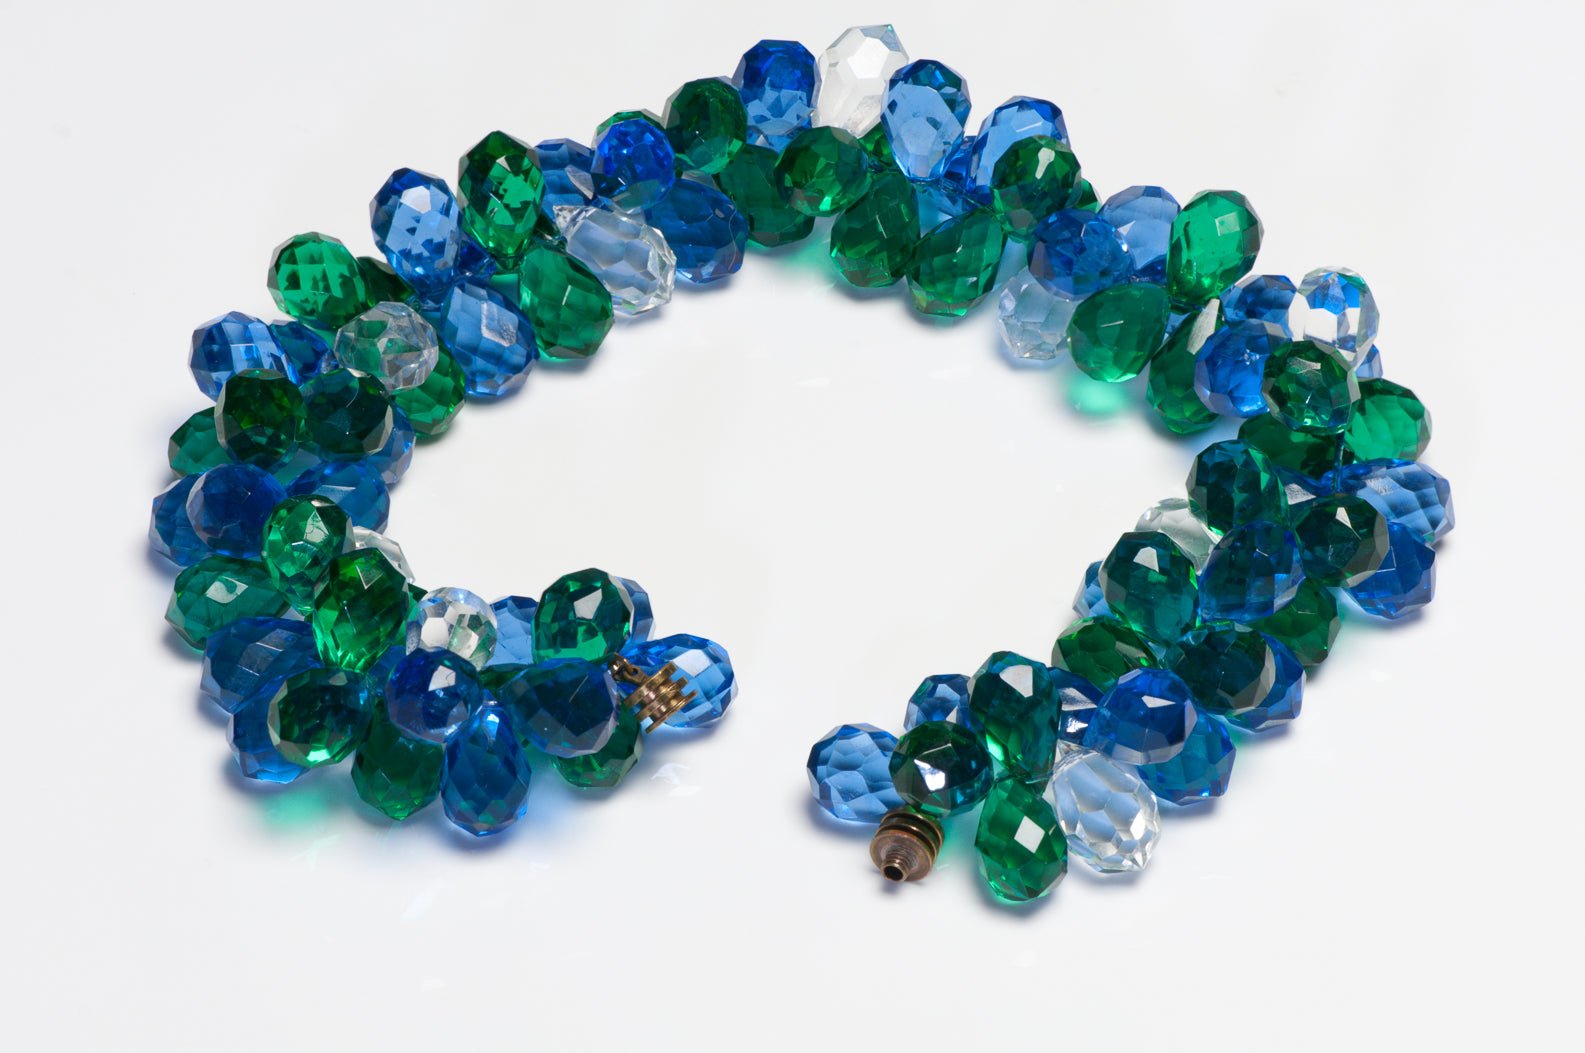 Vintage 1960’s French Blue Green Glass Beads Collar Necklace